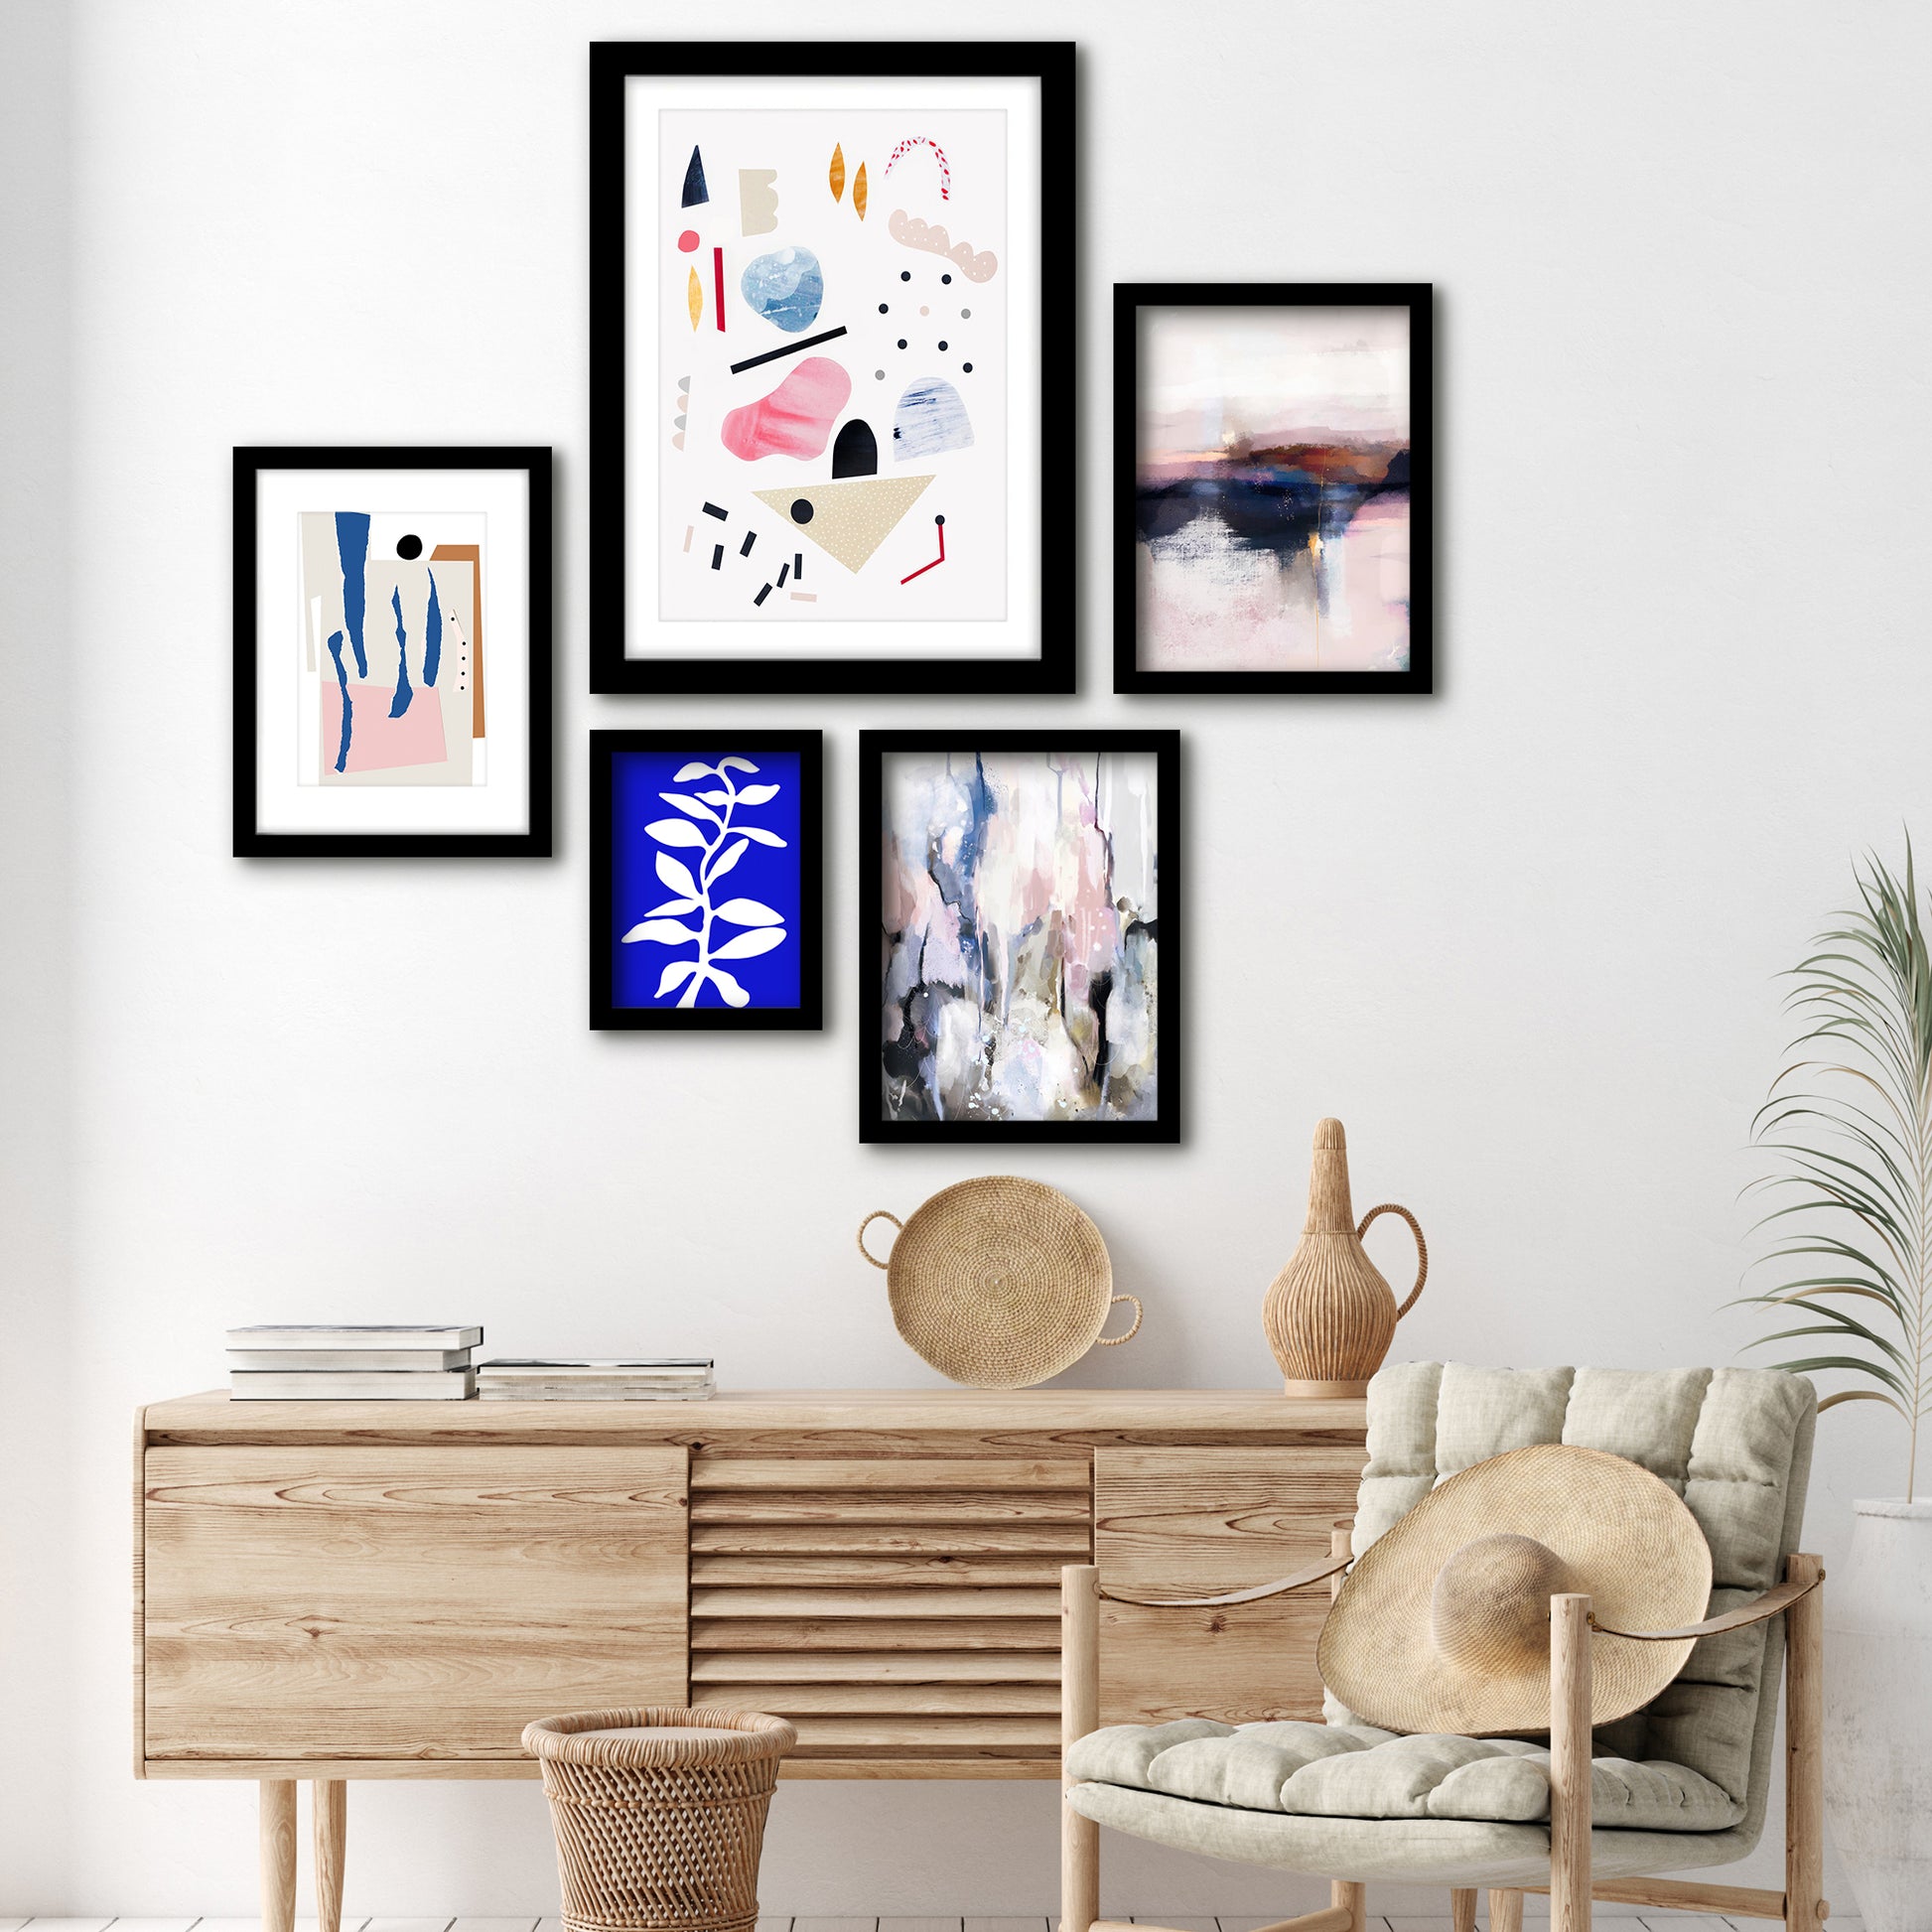 Americanflat 5 Piece Black Framed Gallery Wall Art Set - Blue & Pink Matisse Abstract Shapes